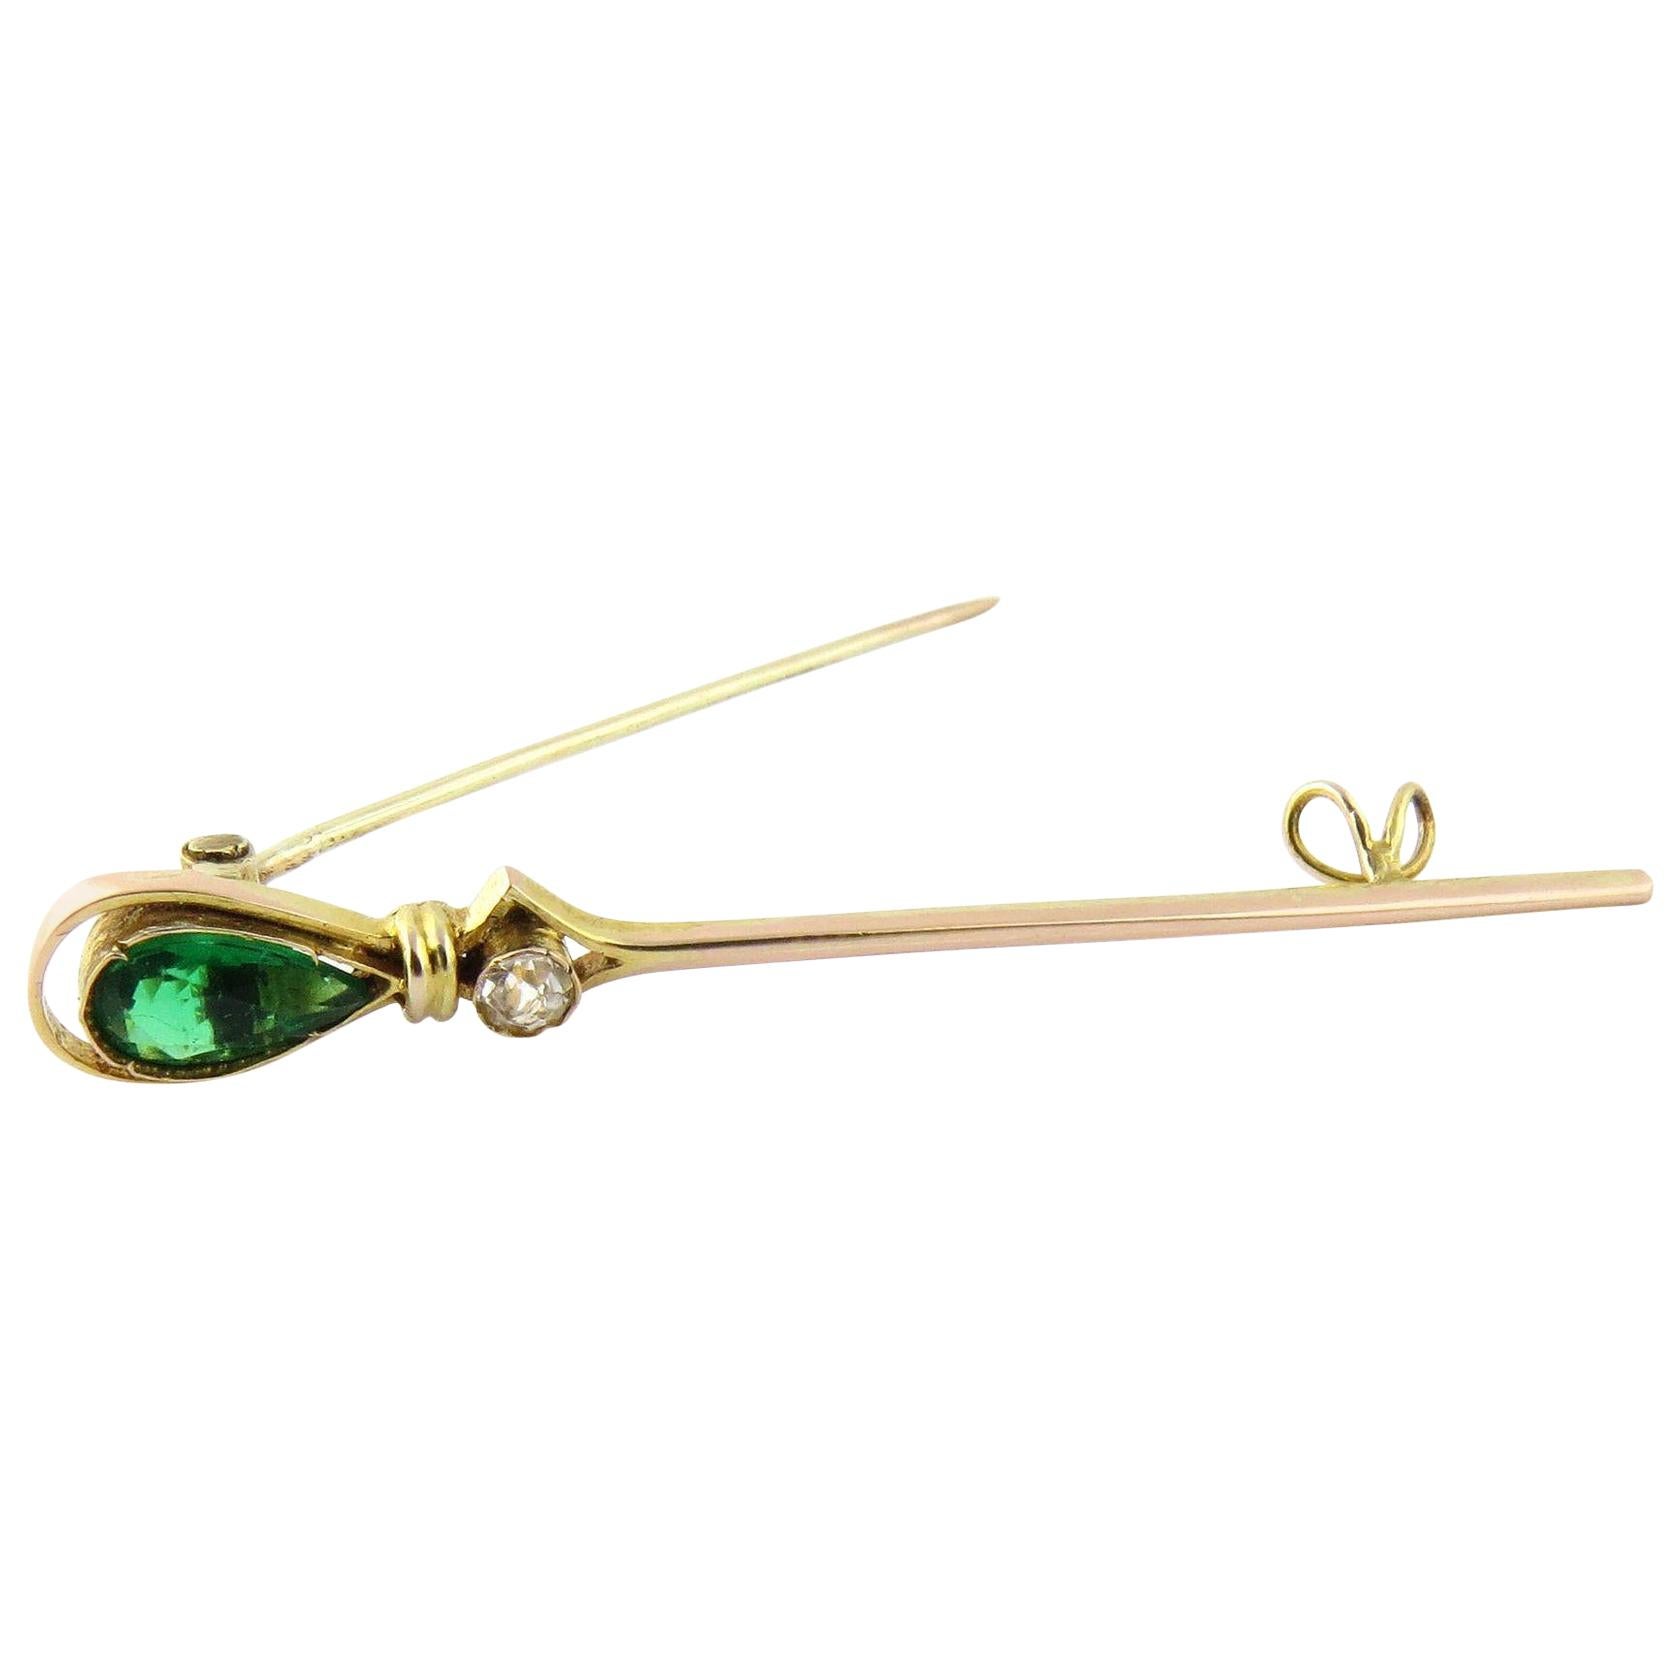 Antique 10 Karat Yellow Gold Pin with Emerald and White Sapphire